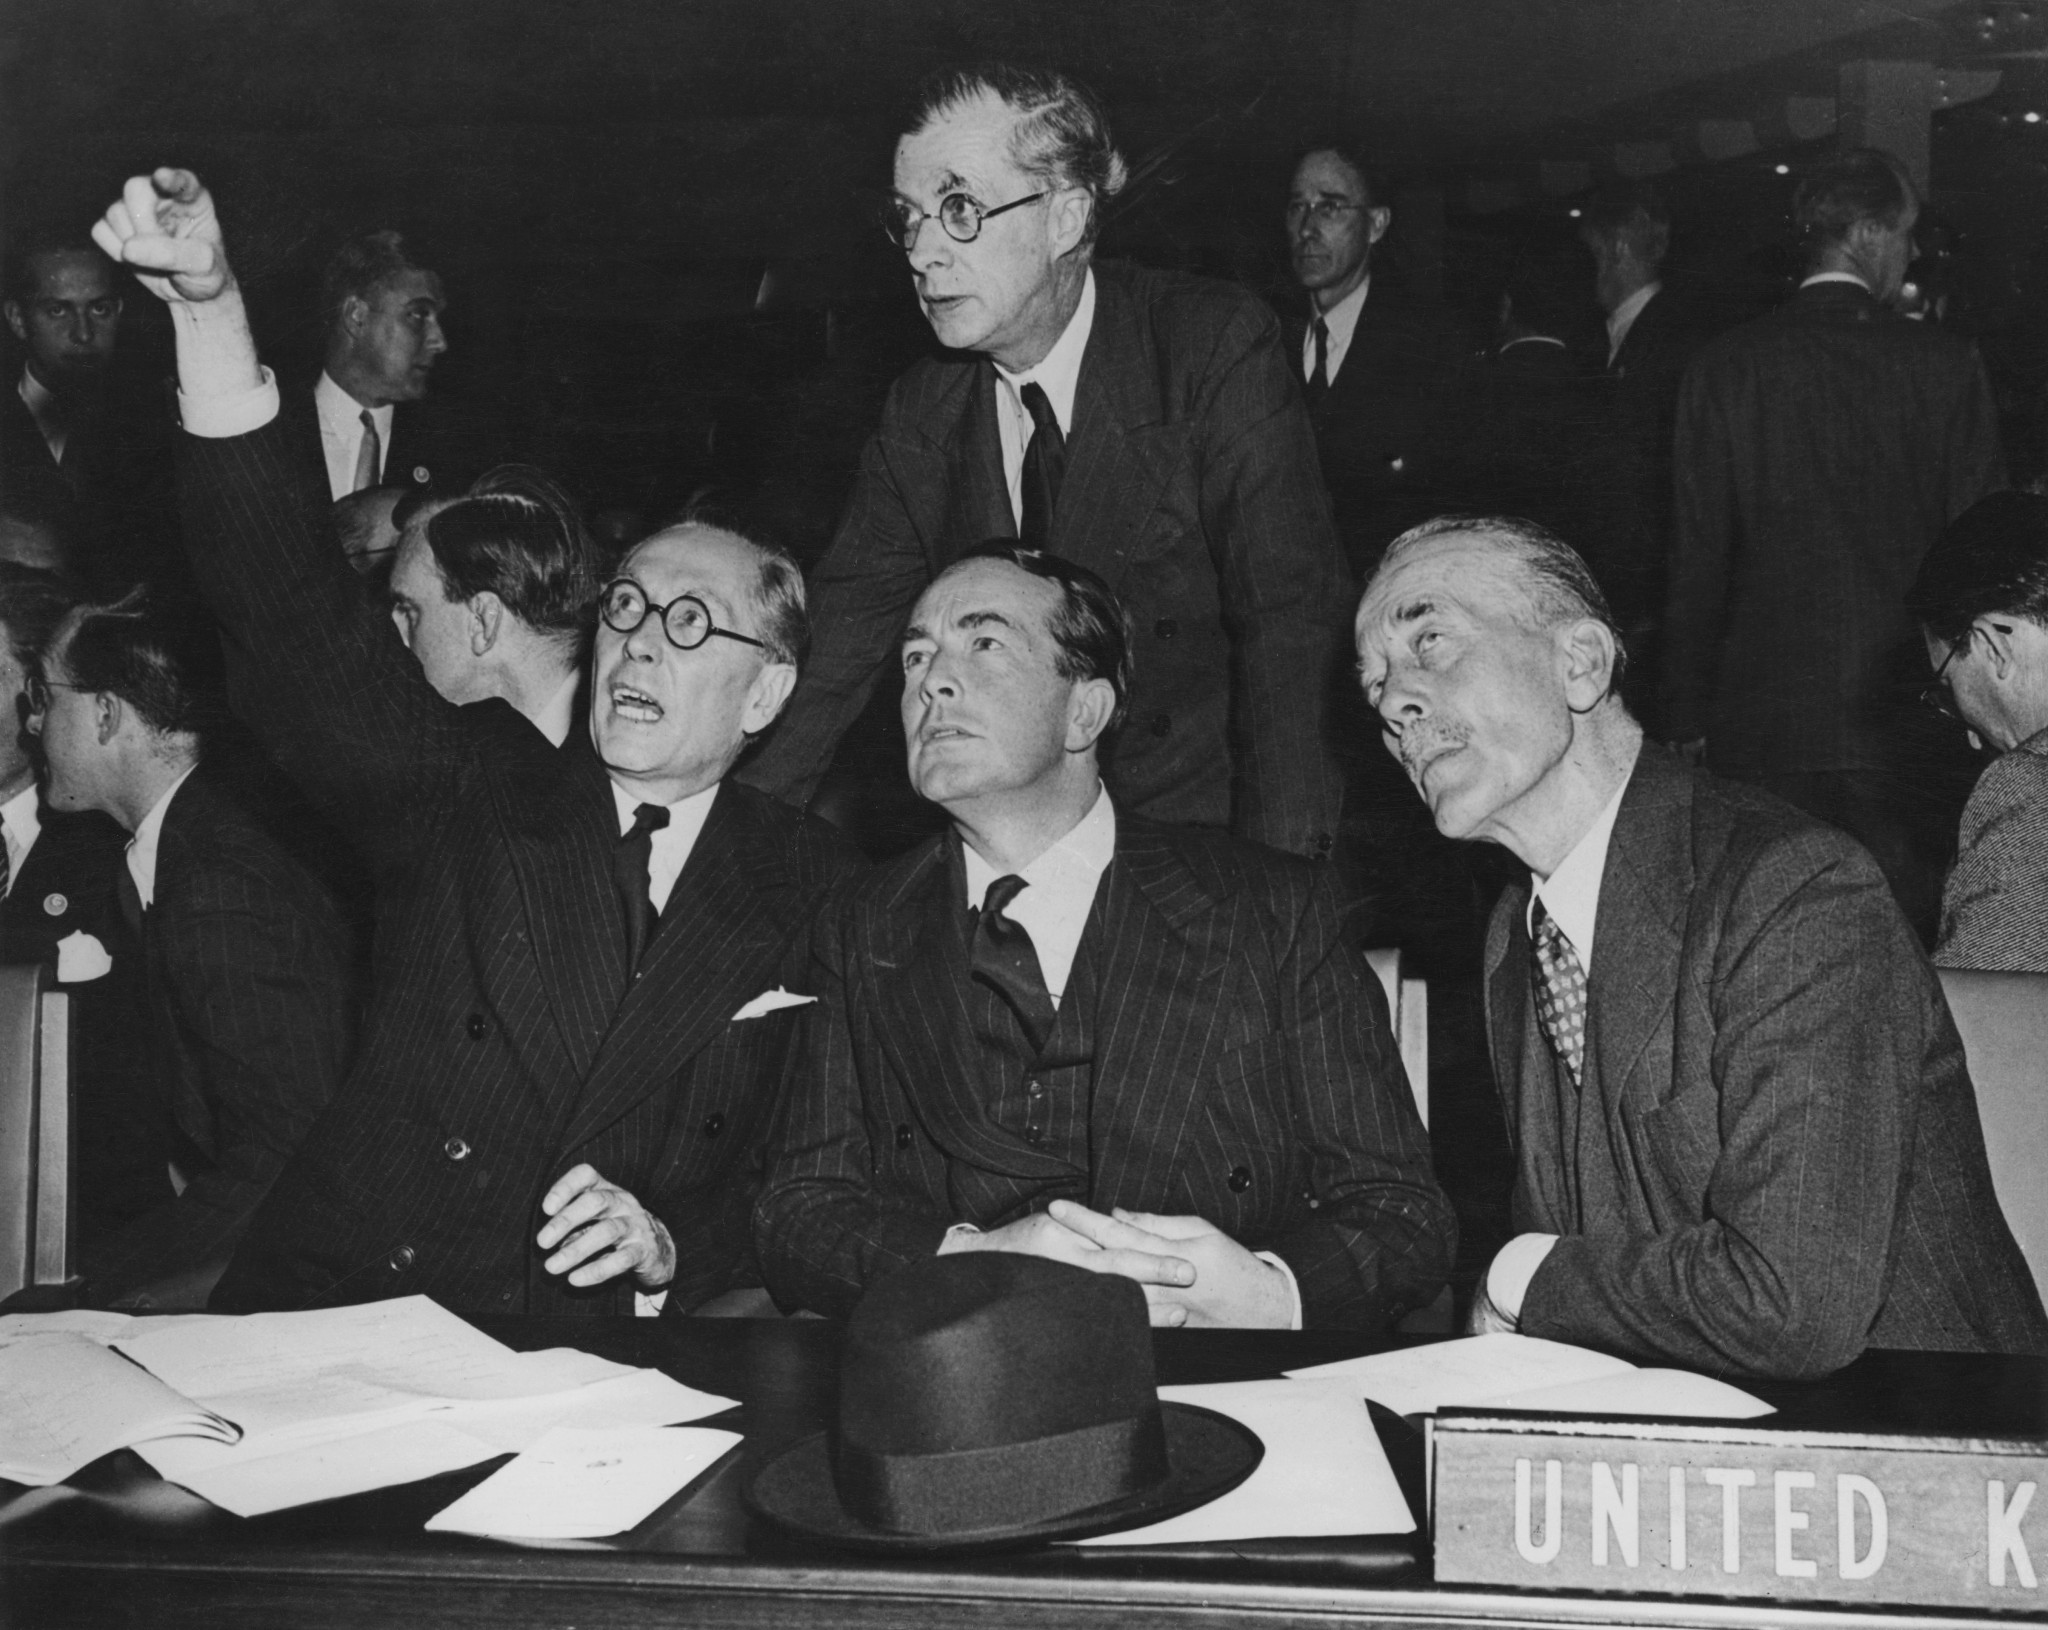 Philip Noel-Baker, left, at the United Nations General Assembly in New York City in 1946 ©Getty Images